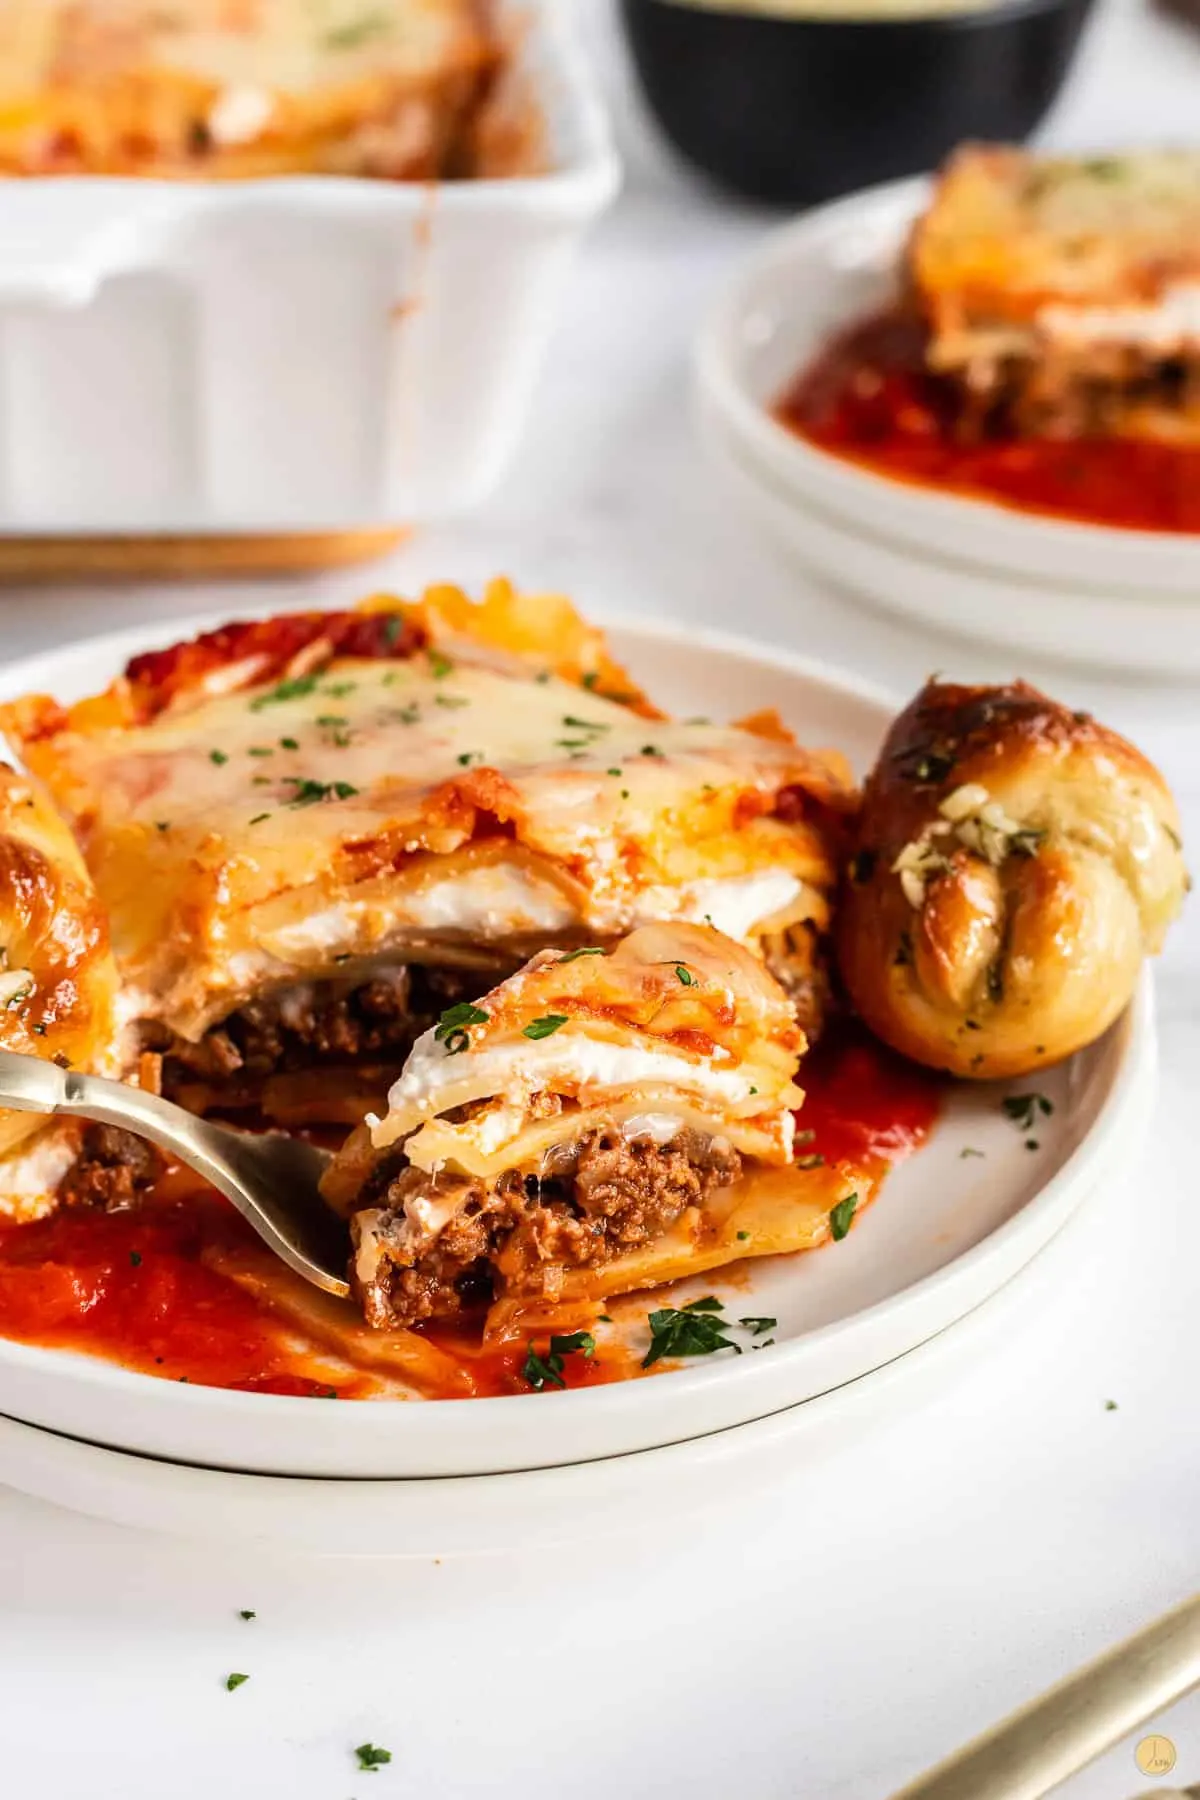 slice of lasagna on plate with fork